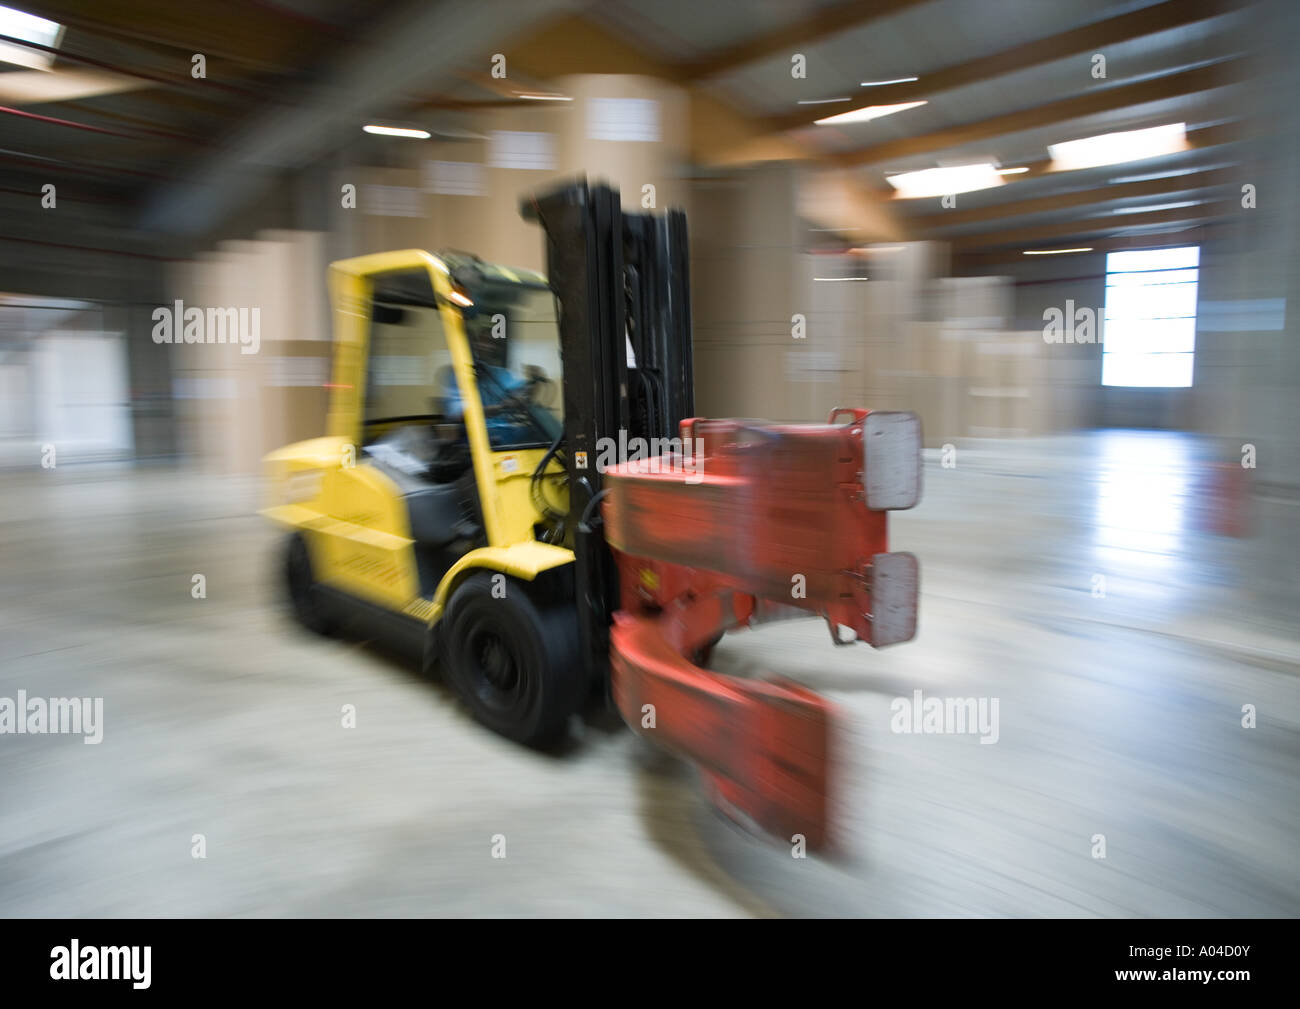 Forklift in paper mill Stock Photo